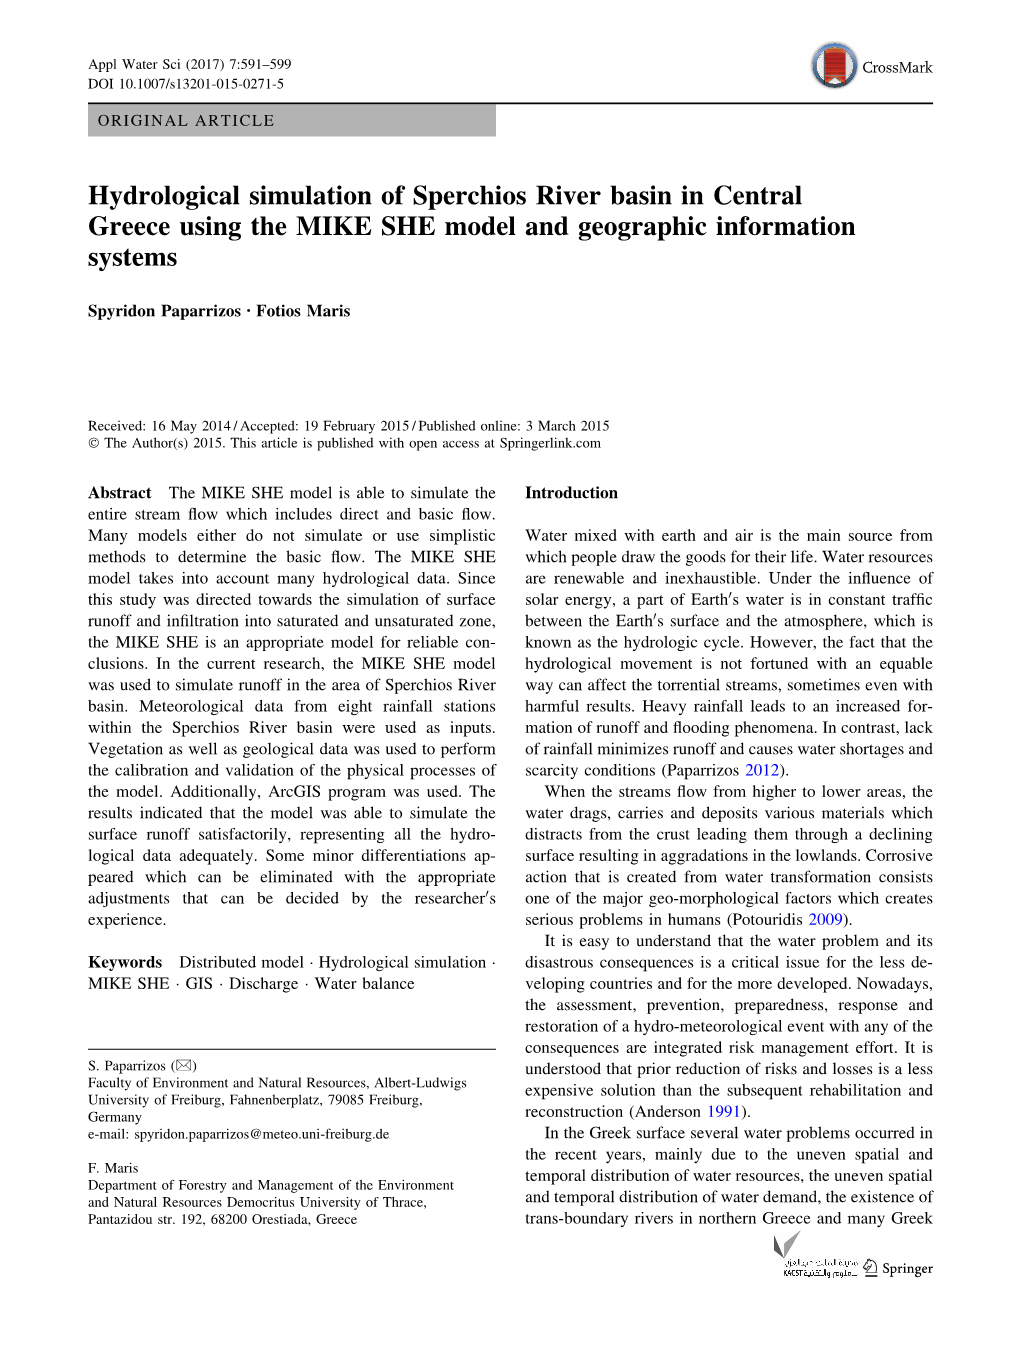 Hydrological Simulation of Sperchios River Basin in Central Greece Using the MIKE SHE Model and Geographic Information Systems